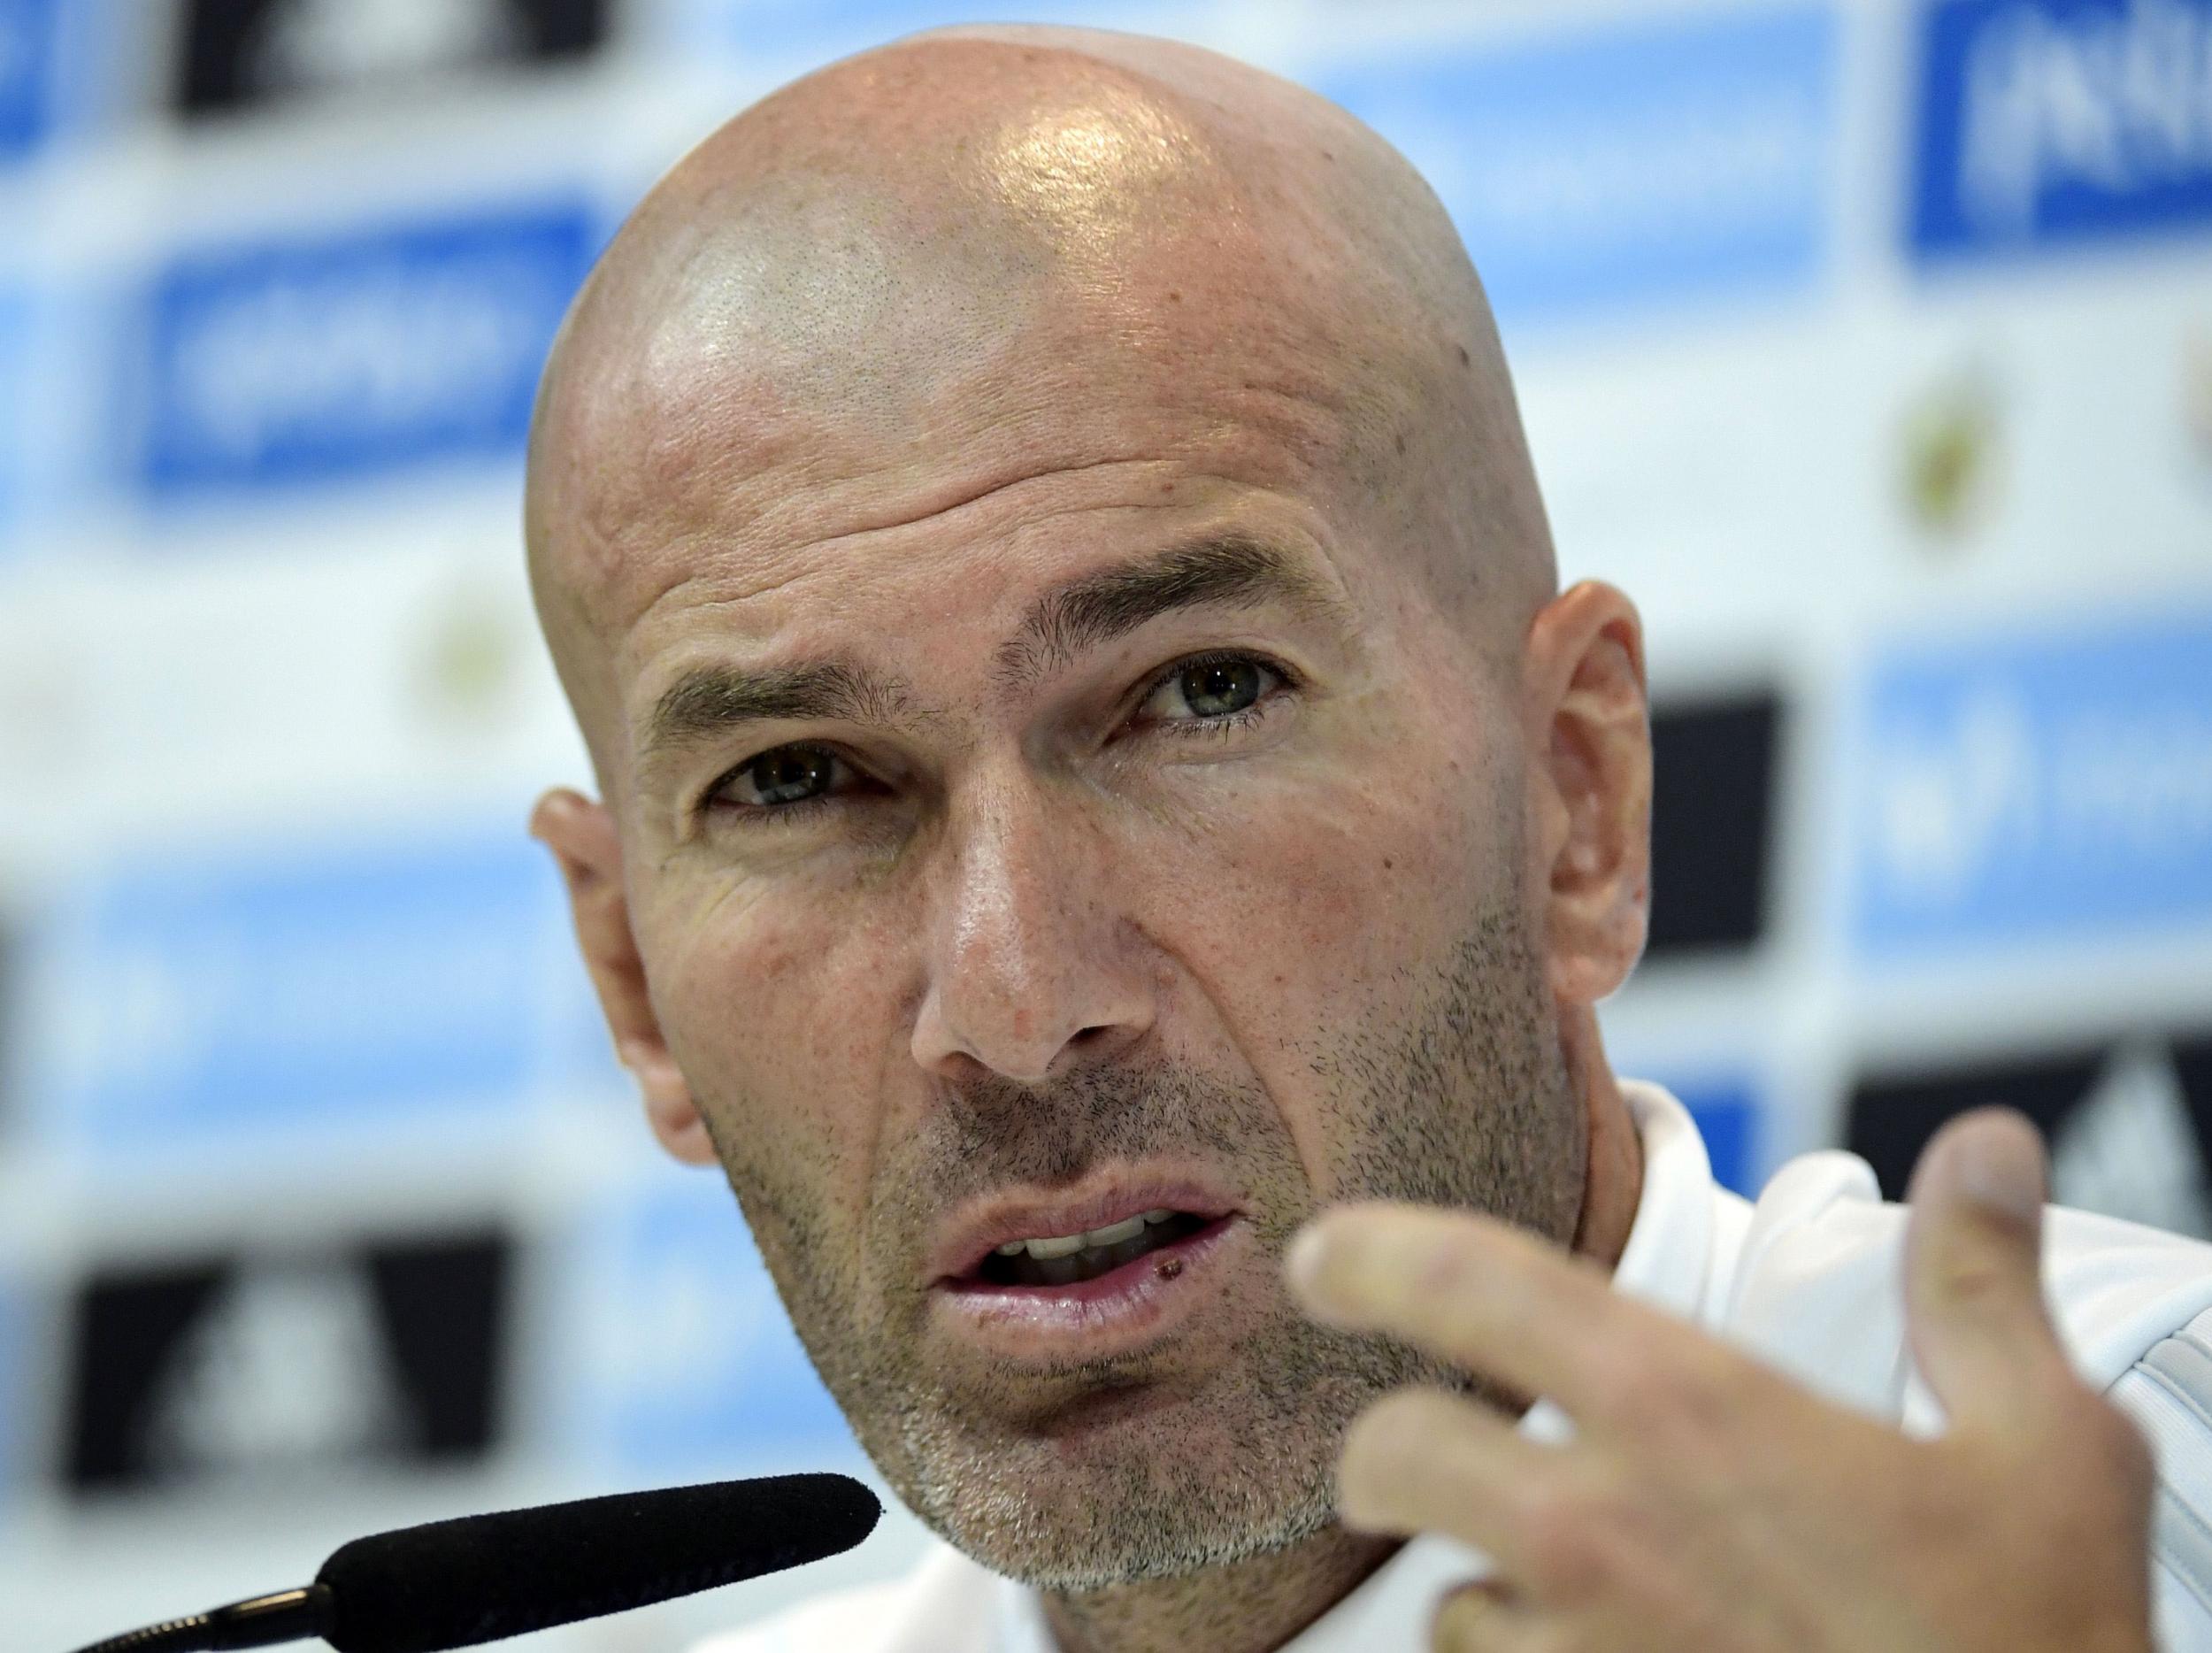 Zinedine Zidane appeared to suggest there is an anti-Real Madrid conspiracy among Spanish officials